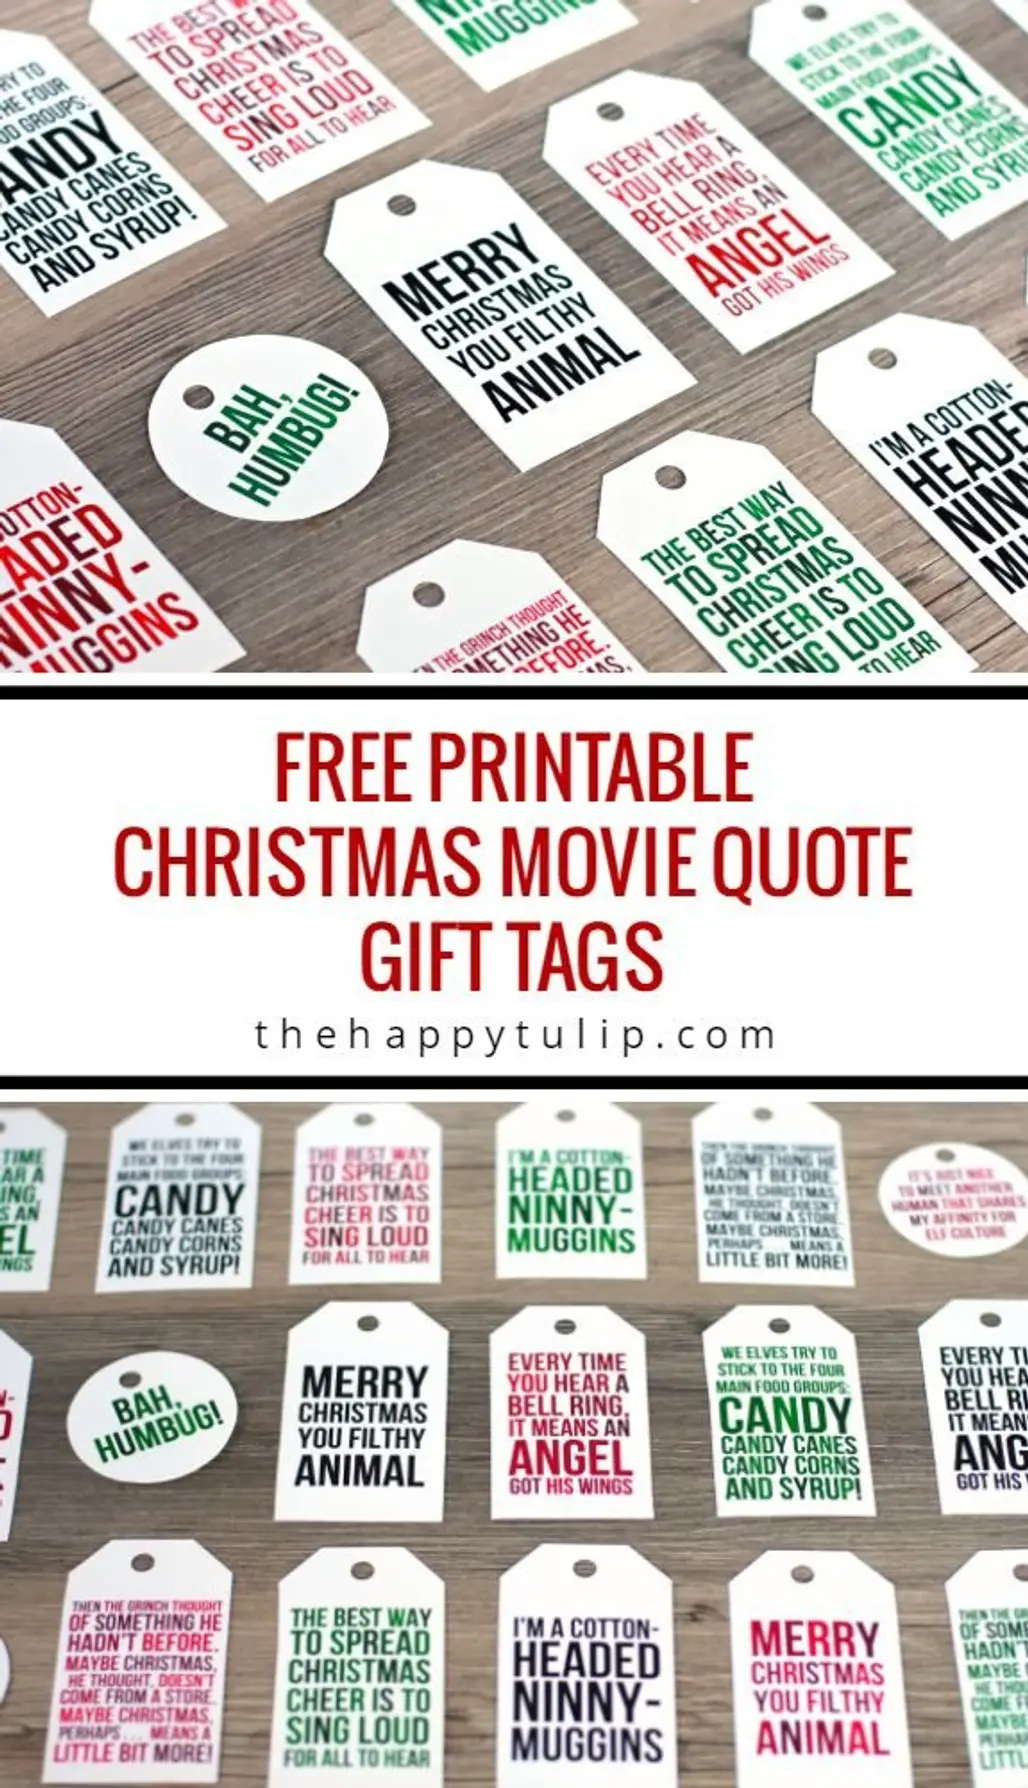 Free Printable Christmas Movie Quote Gift Tags